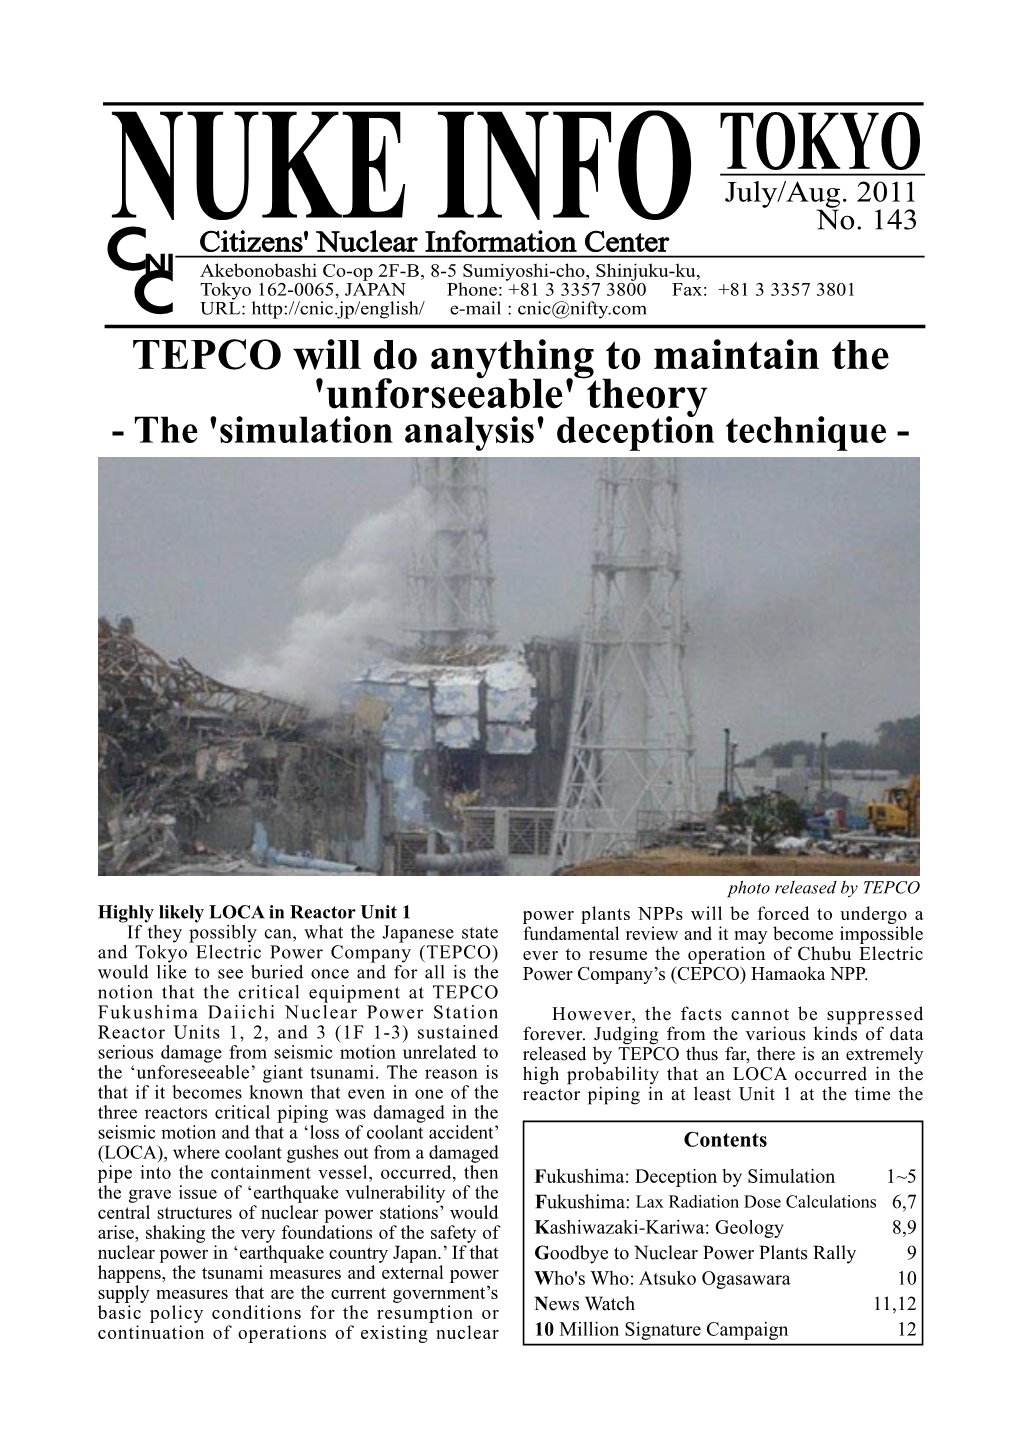 TEPCO Will Do Anything to Maintain the 'Unforseeable' Theory - the 'Simulation Analysis' Deception Technique